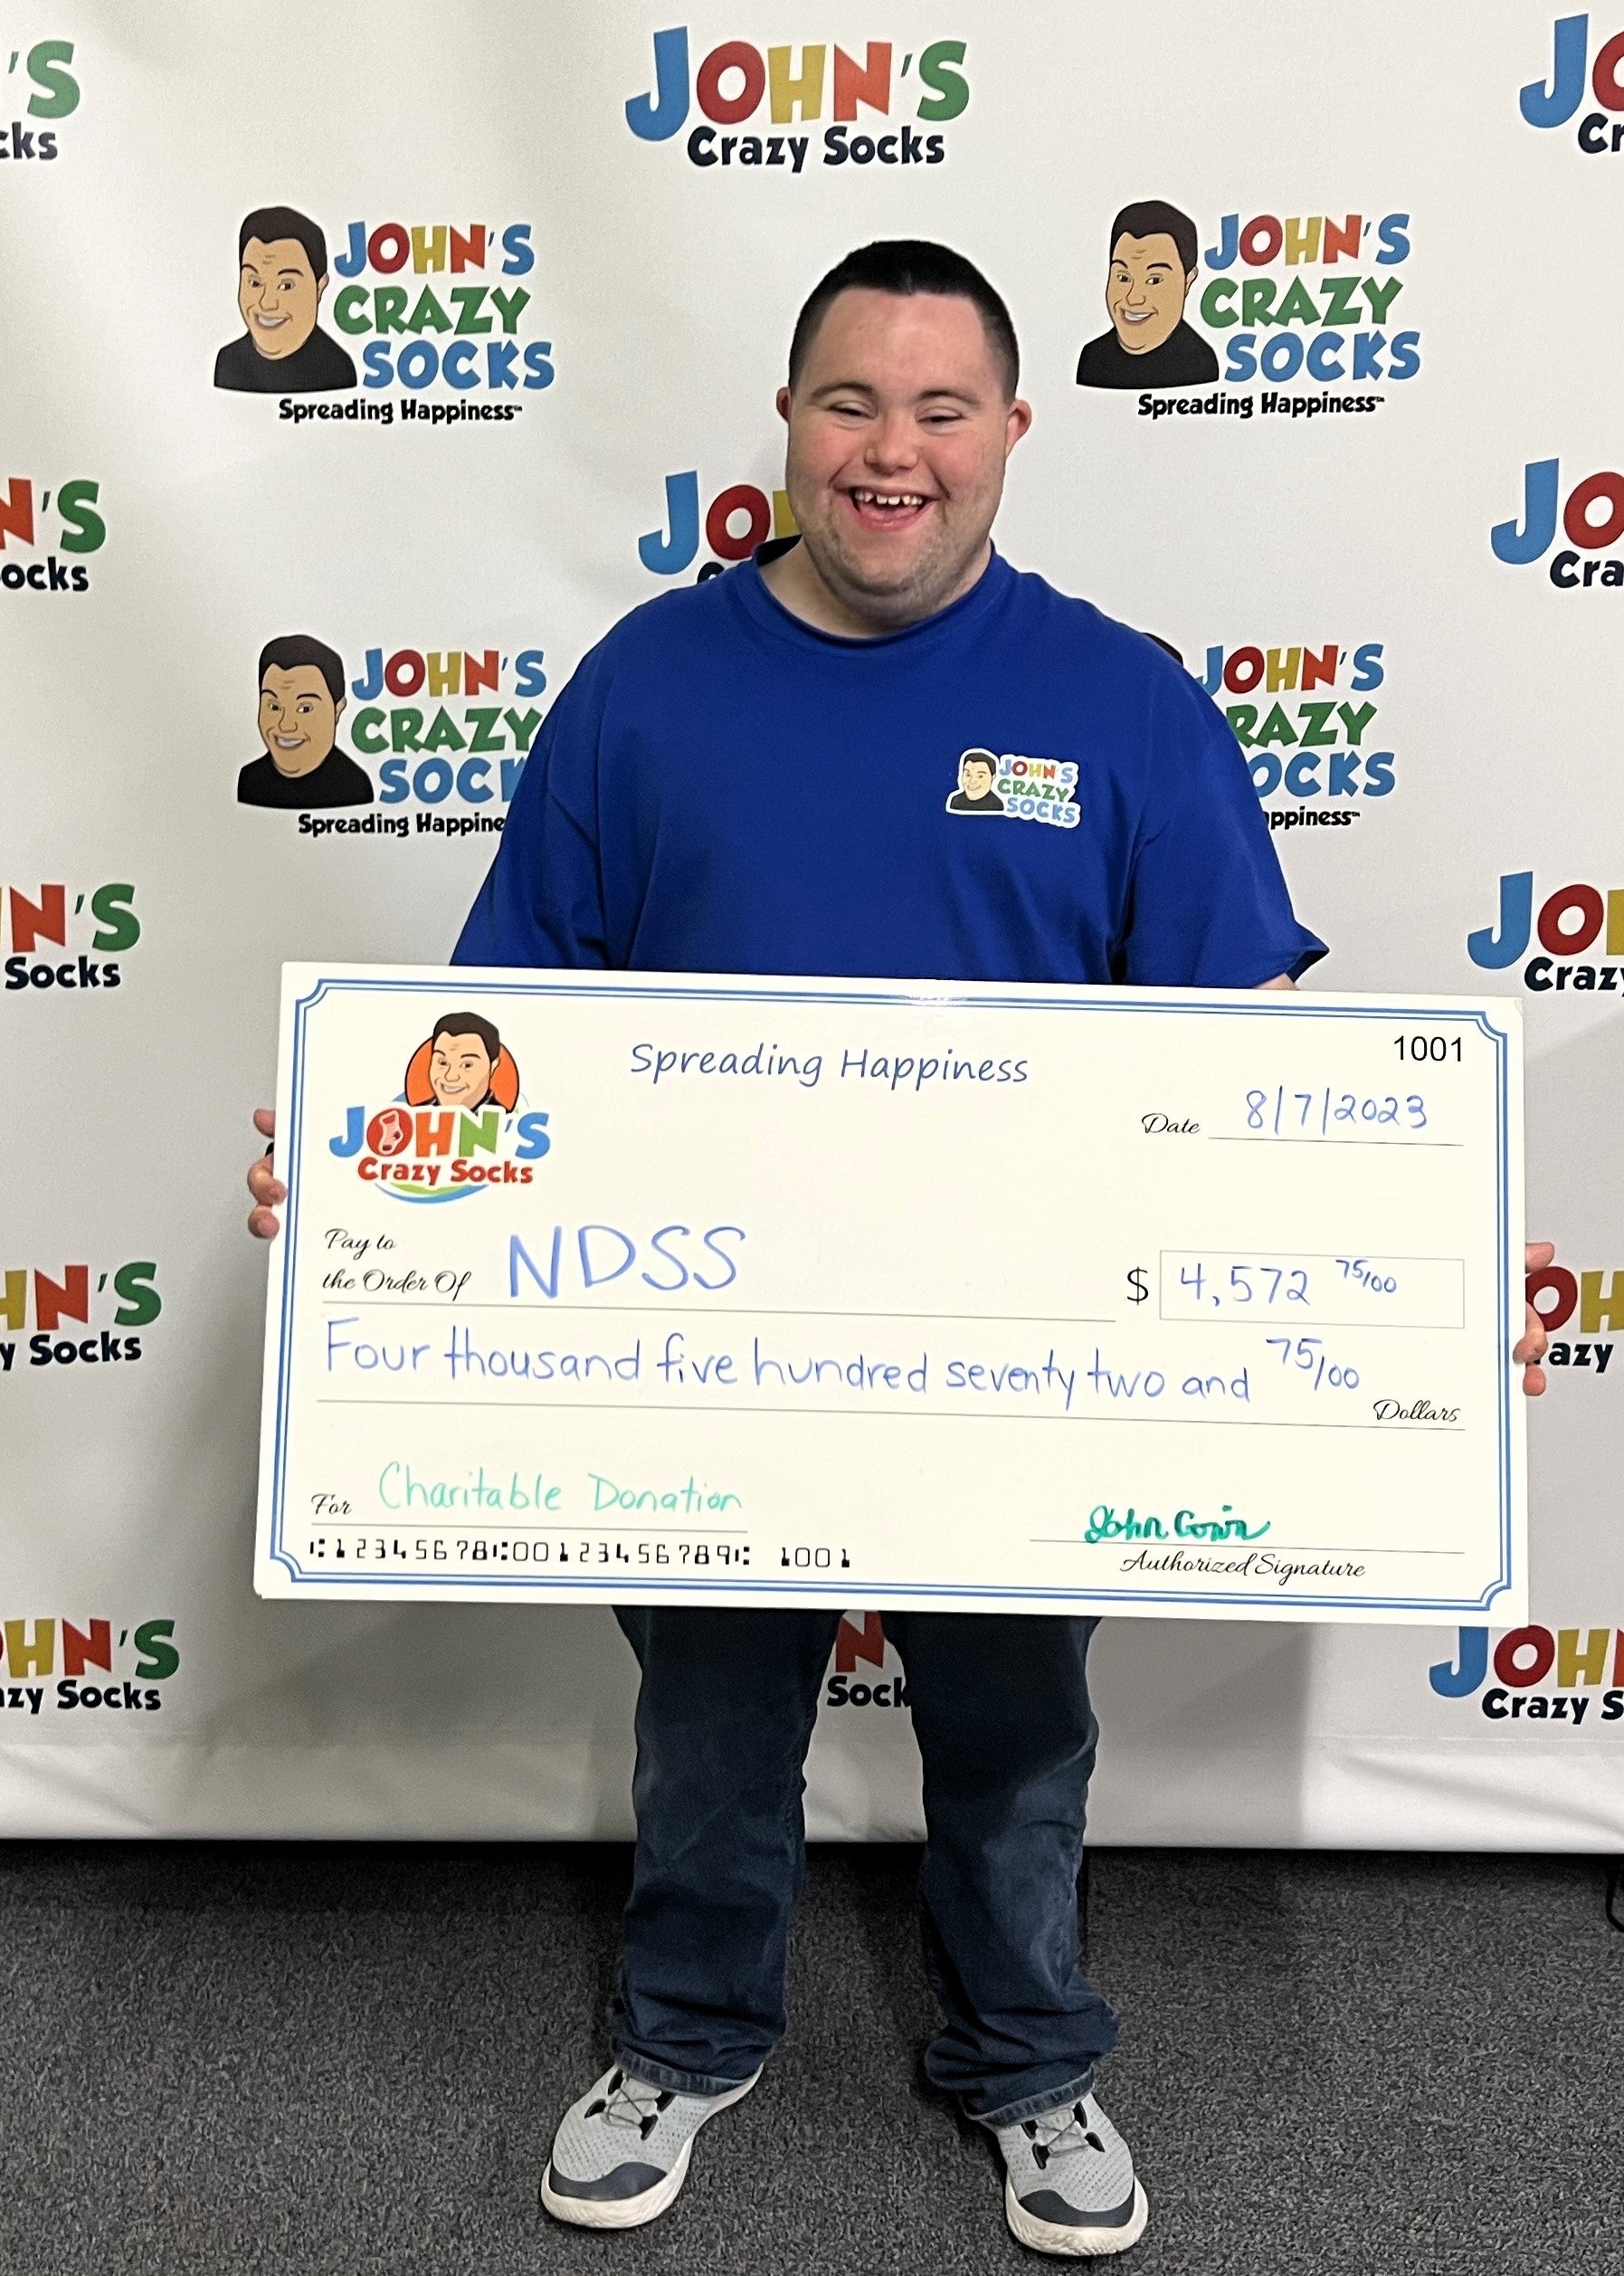 John’s Crazy Socks Sends a Big Check to the National Down Syndrome Society (NDSS)